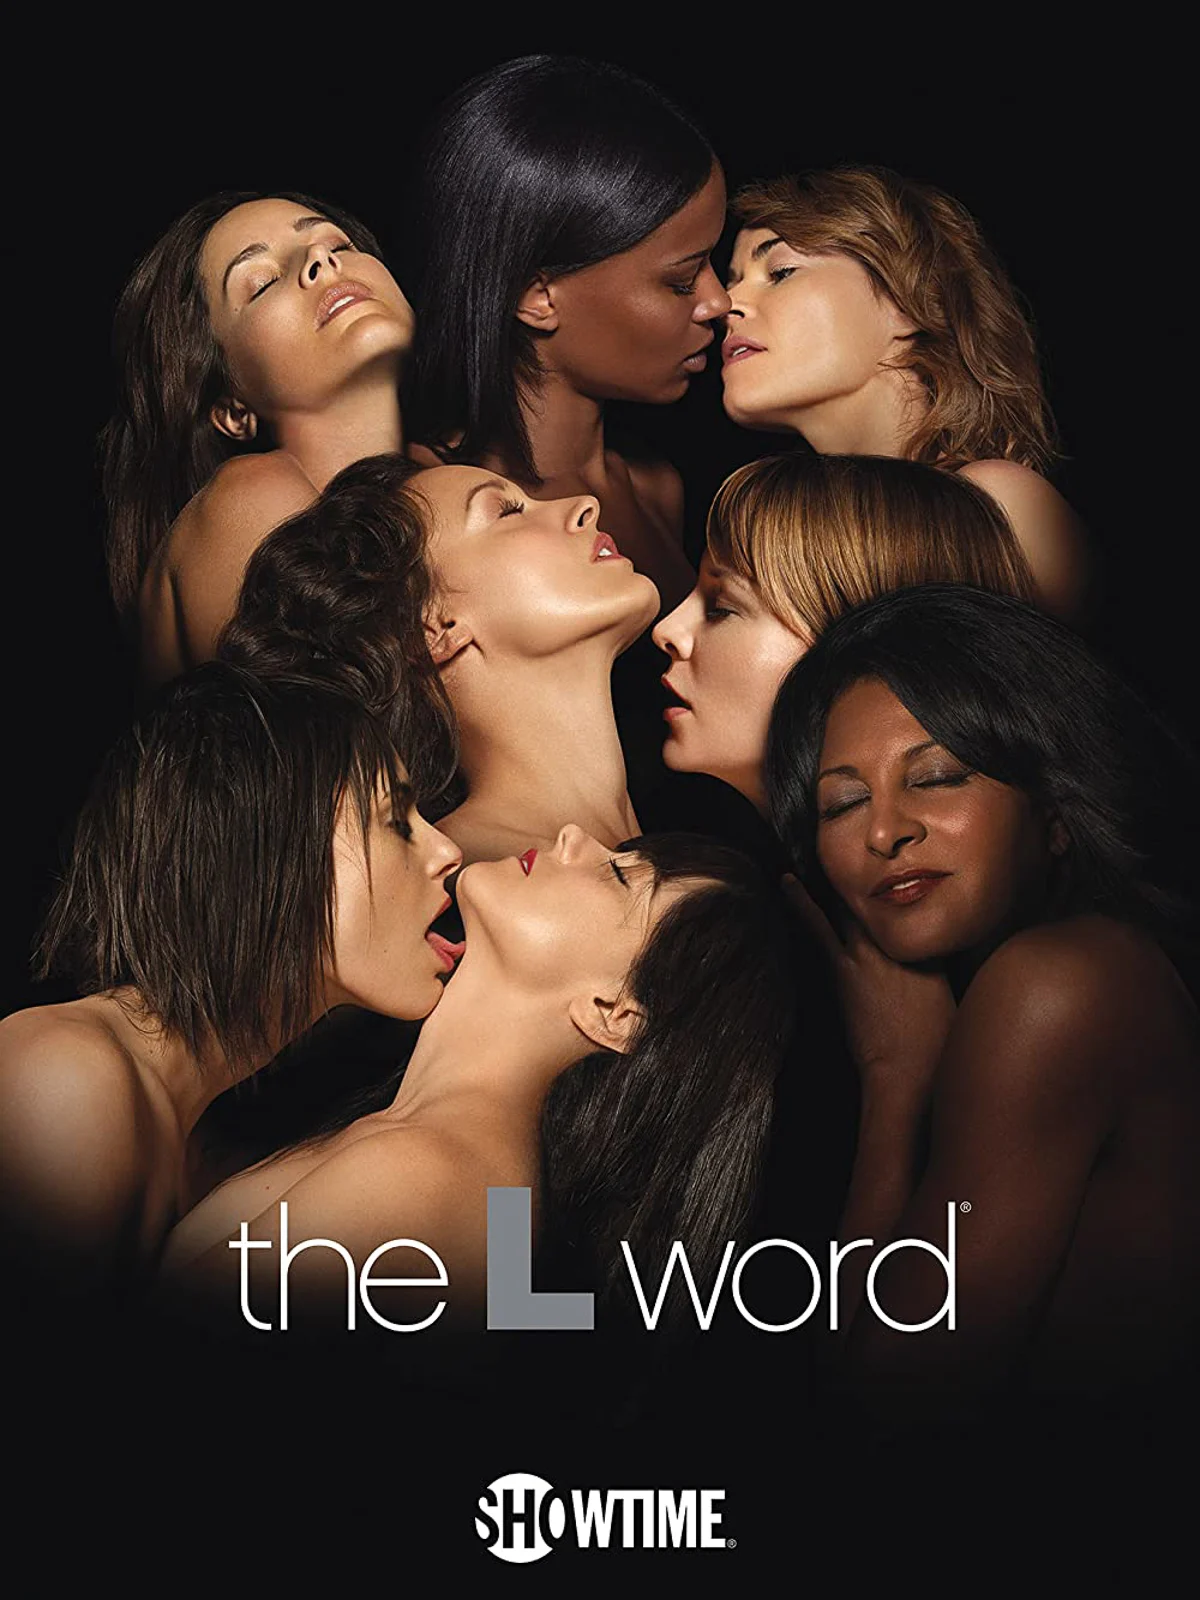 The L Word 2004-2009 Showtime